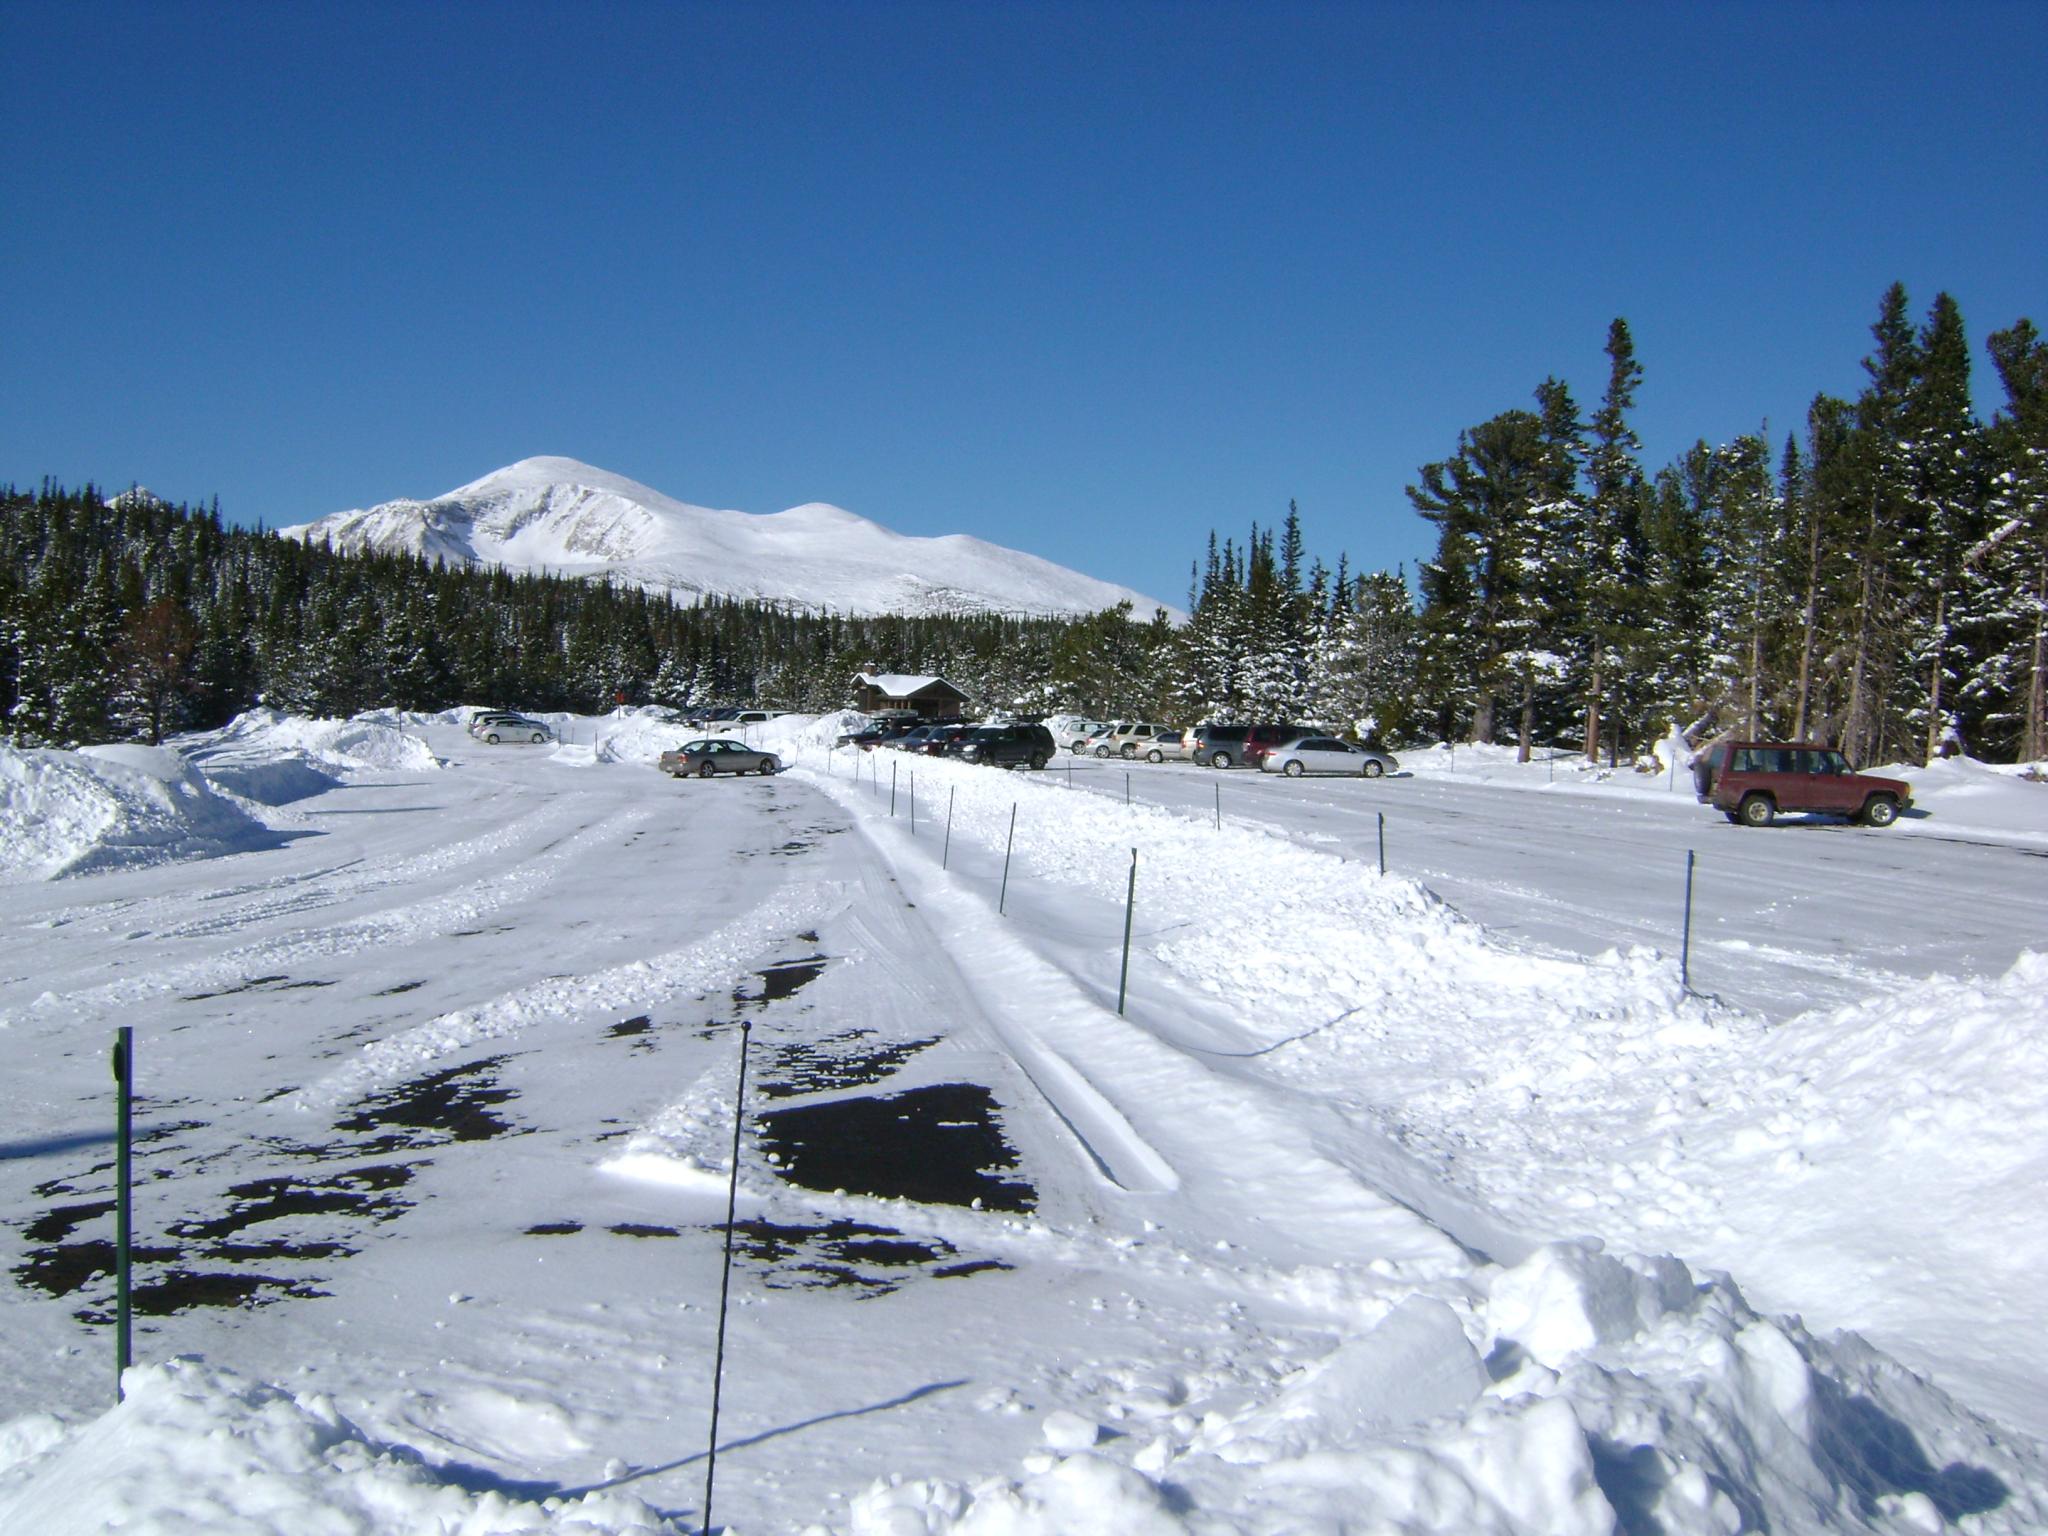 Parking area for Brainard lake access in winter.